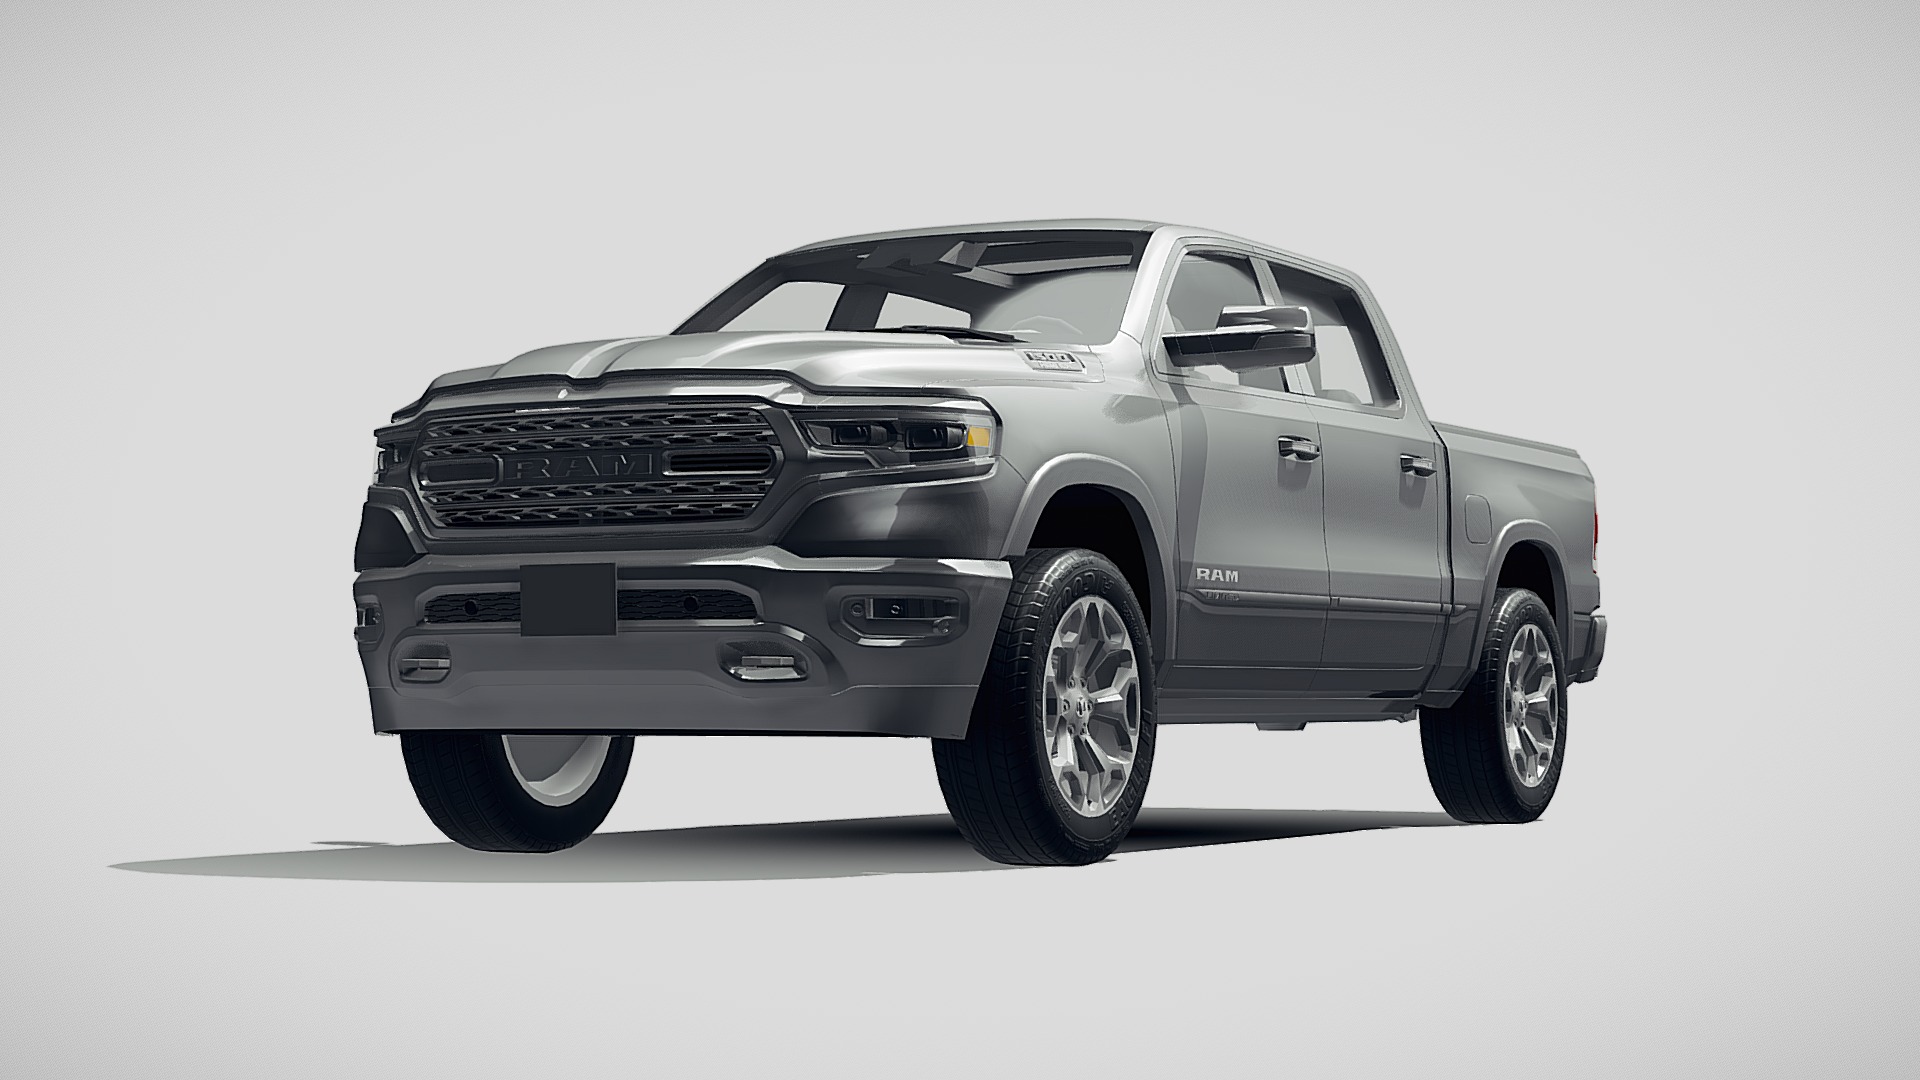 3D model LowPoly Dodge Ram 1500 2019 - This is a 3D model of the LowPoly Dodge Ram 1500 2019. The 3D model is about a silver car with black wheels.